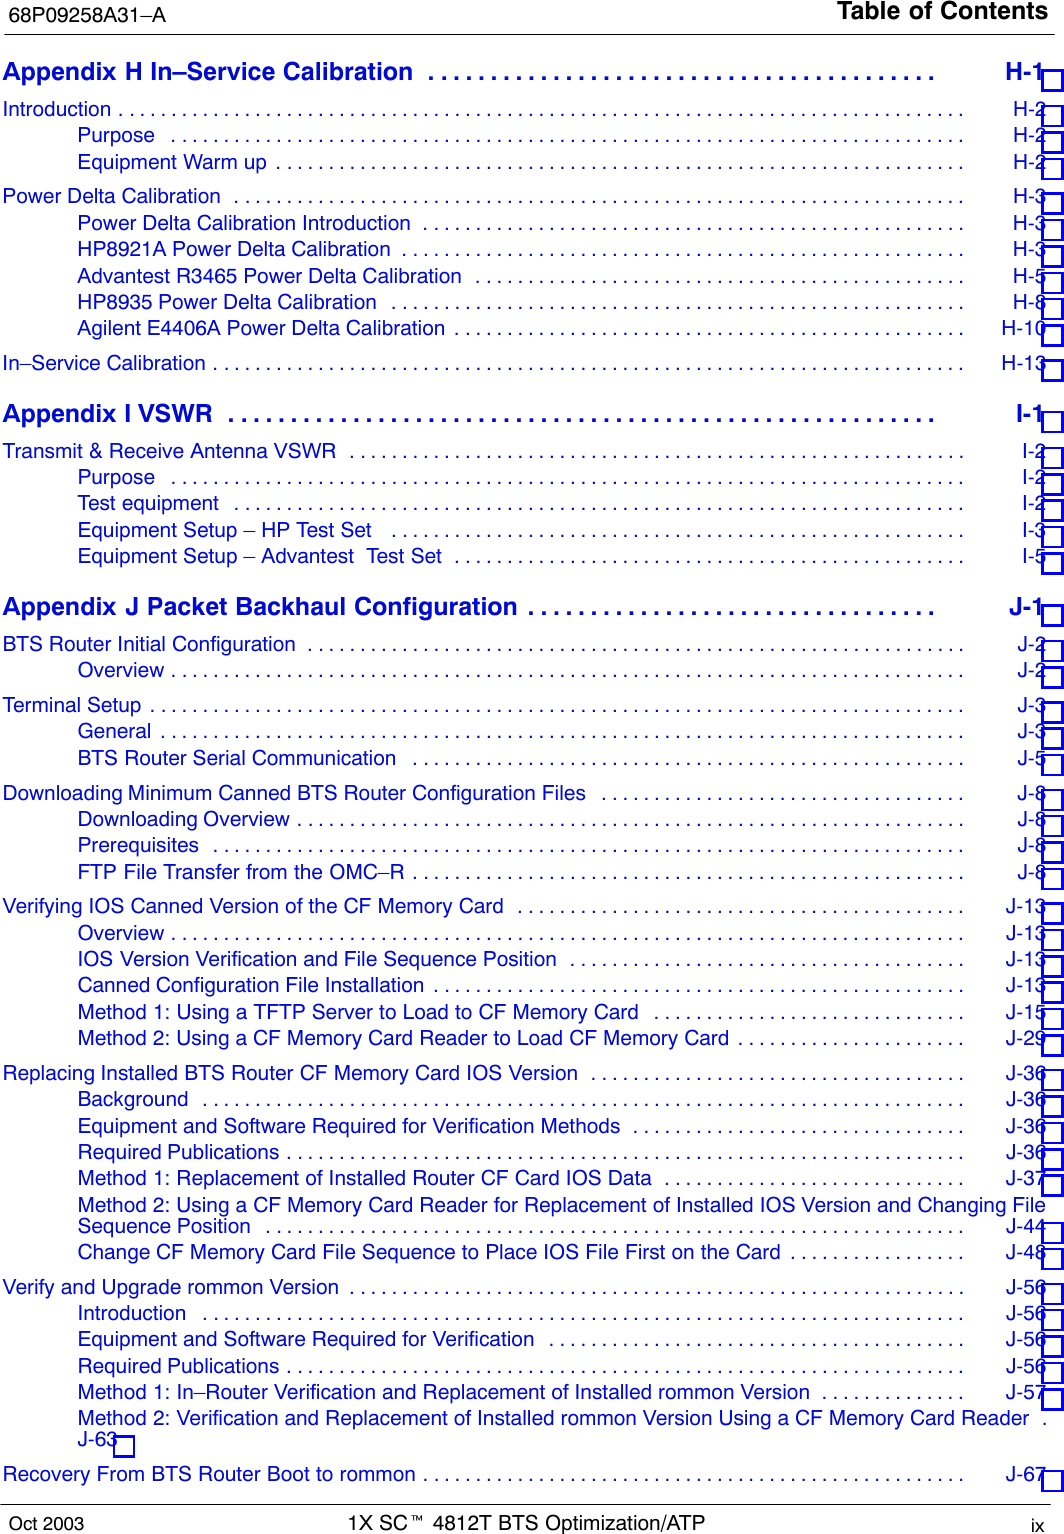 Table of Contents68P09258A31–A1X SCt 4812T BTS Optimization/ATP ixOct 2003Appendix H In–Service Calibration H-1 . . . . . . . . . . . . . . . . . . . . . . . . . . . . . . . . . . . . . . . . . Introduction H-2 . . . . . . . . . . . . . . . . . . . . . . . . . . . . . . . . . . . . . . . . . . . . . . . . . . . . . . . . . . . . . . . . . . . . . . . . . . . . . . . . . Purpose H-2 . . . . . . . . . . . . . . . . . . . . . . . . . . . . . . . . . . . . . . . . . . . . . . . . . . . . . . . . . . . . . . . . . . . . . . . . . . . . Equipment Warm up H-2 . . . . . . . . . . . . . . . . . . . . . . . . . . . . . . . . . . . . . . . . . . . . . . . . . . . . . . . . . . . . . . . . . . Power Delta Calibration H-3 . . . . . . . . . . . . . . . . . . . . . . . . . . . . . . . . . . . . . . . . . . . . . . . . . . . . . . . . . . . . . . . . . . . . . . Power Delta Calibration Introduction H-3 . . . . . . . . . . . . . . . . . . . . . . . . . . . . . . . . . . . . . . . . . . . . . . . . . . . . HP8921A Power Delta Calibration H-3 . . . . . . . . . . . . . . . . . . . . . . . . . . . . . . . . . . . . . . . . . . . . . . . . . . . . . . Advantest R3465 Power Delta Calibration H-5 . . . . . . . . . . . . . . . . . . . . . . . . . . . . . . . . . . . . . . . . . . . . . . . HP8935 Power Delta Calibration H-8 . . . . . . . . . . . . . . . . . . . . . . . . . . . . . . . . . . . . . . . . . . . . . . . . . . . . . . . Agilent E4406A Power Delta Calibration H-10 . . . . . . . . . . . . . . . . . . . . . . . . . . . . . . . . . . . . . . . . . . . . . . . . . In–Service Calibration H-13 . . . . . . . . . . . . . . . . . . . . . . . . . . . . . . . . . . . . . . . . . . . . . . . . . . . . . . . . . . . . . . . . . . . . . . . . Appendix I VSWR I-1 . . . . . . . . . . . . . . . . . . . . . . . . . . . . . . . . . . . . . . . . . . . . . . . . . . . . . . . . . Transmit &amp; Receive Antenna VSWR I-2 . . . . . . . . . . . . . . . . . . . . . . . . . . . . . . . . . . . . . . . . . . . . . . . . . . . . . . . . . . . Purpose I-2 . . . . . . . . . . . . . . . . . . . . . . . . . . . . . . . . . . . . . . . . . . . . . . . . . . . . . . . . . . . . . . . . . . . . . . . . . . . . Test equipment I-2 . . . . . . . . . . . . . . . . . . . . . . . . . . . . . . . . . . . . . . . . . . . . . . . . . . . . . . . . . . . . . . . . . . . . . . Equipment Setup – HP Test Set  I-3 . . . . . . . . . . . . . . . . . . . . . . . . . . . . . . . . . . . . . . . . . . . . . . . . . . . . . . . Equipment Setup – Advantest  Test Set I-5 . . . . . . . . . . . . . . . . . . . . . . . . . . . . . . . . . . . . . . . . . . . . . . . . . Appendix J Packet Backhaul Configuration J-1 . . . . . . . . . . . . . . . . . . . . . . . . . . . . . . . . . BTS Router Initial Configuration J-2 . . . . . . . . . . . . . . . . . . . . . . . . . . . . . . . . . . . . . . . . . . . . . . . . . . . . . . . . . . . . . . . Overview J-2 . . . . . . . . . . . . . . . . . . . . . . . . . . . . . . . . . . . . . . . . . . . . . . . . . . . . . . . . . . . . . . . . . . . . . . . . . . . . Terminal Setup J-3 . . . . . . . . . . . . . . . . . . . . . . . . . . . . . . . . . . . . . . . . . . . . . . . . . . . . . . . . . . . . . . . . . . . . . . . . . . . . . . General J-3 . . . . . . . . . . . . . . . . . . . . . . . . . . . . . . . . . . . . . . . . . . . . . . . . . . . . . . . . . . . . . . . . . . . . . . . . . . . . . BTS Router Serial Communication J-5 . . . . . . . . . . . . . . . . . . . . . . . . . . . . . . . . . . . . . . . . . . . . . . . . . . . . . Downloading Minimum Canned BTS Router Configuration Files J-8 . . . . . . . . . . . . . . . . . . . . . . . . . . . . . . . . . . . Downloading Overview J-8 . . . . . . . . . . . . . . . . . . . . . . . . . . . . . . . . . . . . . . . . . . . . . . . . . . . . . . . . . . . . . . . . Prerequisites J-8 . . . . . . . . . . . . . . . . . . . . . . . . . . . . . . . . . . . . . . . . . . . . . . . . . . . . . . . . . . . . . . . . . . . . . . . . FTP File Transfer from the OMC–R J-8 . . . . . . . . . . . . . . . . . . . . . . . . . . . . . . . . . . . . . . . . . . . . . . . . . . . . . Verifying IOS Canned Version of the CF Memory Card J-13 . . . . . . . . . . . . . . . . . . . . . . . . . . . . . . . . . . . . . . . . . . . Overview J-13 . . . . . . . . . . . . . . . . . . . . . . . . . . . . . . . . . . . . . . . . . . . . . . . . . . . . . . . . . . . . . . . . . . . . . . . . . . . . IOS Version Verification and File Sequence Position J-13 . . . . . . . . . . . . . . . . . . . . . . . . . . . . . . . . . . . . . . Canned Configuration File Installation J-13 . . . . . . . . . . . . . . . . . . . . . . . . . . . . . . . . . . . . . . . . . . . . . . . . . . . Method 1: Using a TFTP Server to Load to CF Memory Card J-15 . . . . . . . . . . . . . . . . . . . . . . . . . . . . . . Method 2: Using a CF Memory Card Reader to Load CF Memory Card J-29 . . . . . . . . . . . . . . . . . . . . . . Replacing Installed BTS Router CF Memory Card IOS Version J-36 . . . . . . . . . . . . . . . . . . . . . . . . . . . . . . . . . . . . Background J-36 . . . . . . . . . . . . . . . . . . . . . . . . . . . . . . . . . . . . . . . . . . . . . . . . . . . . . . . . . . . . . . . . . . . . . . . . . Equipment and Software Required for Verification Methods J-36 . . . . . . . . . . . . . . . . . . . . . . . . . . . . . . . . Required Publications J-36 . . . . . . . . . . . . . . . . . . . . . . . . . . . . . . . . . . . . . . . . . . . . . . . . . . . . . . . . . . . . . . . . . Method 1: Replacement of Installed Router CF Card IOS Data J-37 . . . . . . . . . . . . . . . . . . . . . . . . . . . . . Method 2: Using a CF Memory Card Reader for Replacement of Installed IOS Version and Changing FileSequence Position J-44 . . . . . . . . . . . . . . . . . . . . . . . . . . . . . . . . . . . . . . . . . . . . . . . . . . . . . . . . . . . . . . . . . . . Change CF Memory Card File Sequence to Place IOS File First on the Card J-48 . . . . . . . . . . . . . . . . . Verify and Upgrade rommon Version J-56 . . . . . . . . . . . . . . . . . . . . . . . . . . . . . . . . . . . . . . . . . . . . . . . . . . . . . . . . . . . Introduction J-56 . . . . . . . . . . . . . . . . . . . . . . . . . . . . . . . . . . . . . . . . . . . . . . . . . . . . . . . . . . . . . . . . . . . . . . . . . Equipment and Software Required for Verification J-56 . . . . . . . . . . . . . . . . . . . . . . . . . . . . . . . . . . . . . . . . Required Publications J-56 . . . . . . . . . . . . . . . . . . . . . . . . . . . . . . . . . . . . . . . . . . . . . . . . . . . . . . . . . . . . . . . . . Method 1: In–Router Verification and Replacement of Installed rommon Version J-57 . . . . . . . . . . . . . . Method 2: Verification and Replacement of Installed rommon Version Using a CF Memory Card Reader . J-63 Recovery From BTS Router Boot to rommon J-67 . . . . . . . . . . . . . . . . . . . . . . . . . . . . . . . . . . . . . . . . . . . . . . . . . . . . 